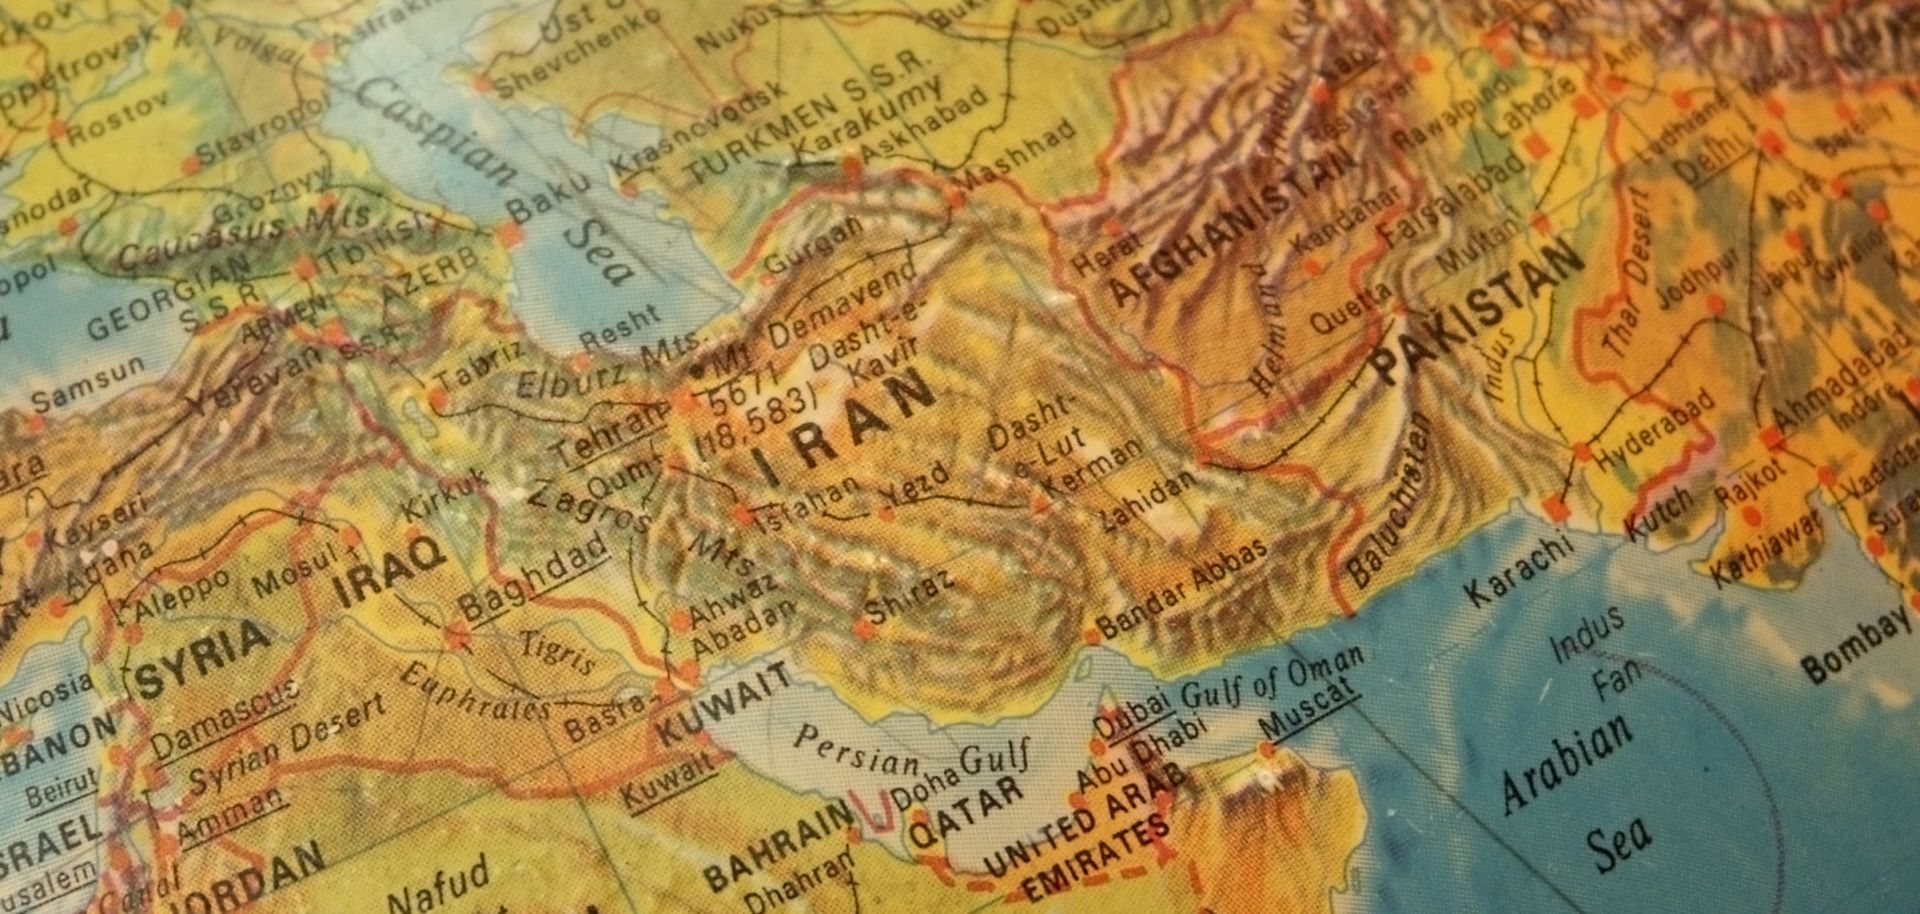 A vintage map shows the Middle East, including Iran.